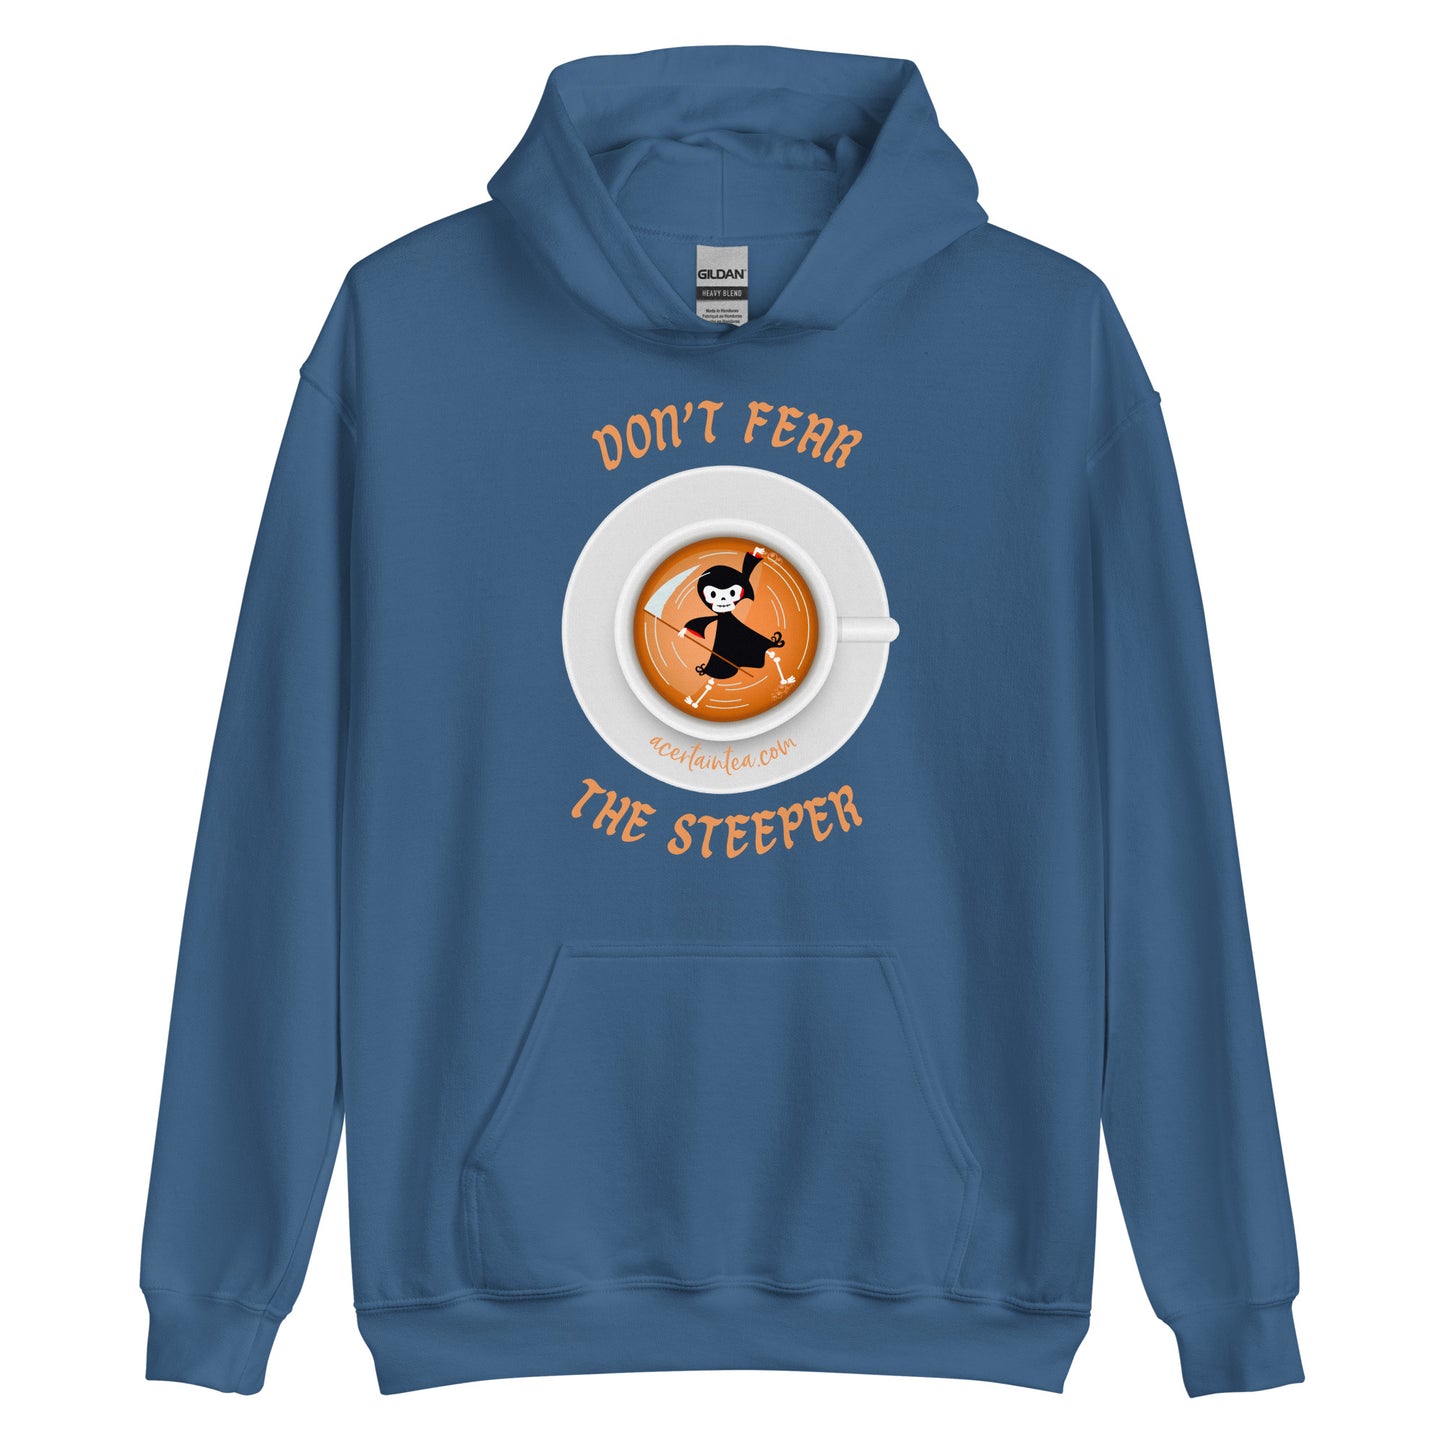 Don’t Fear the Steeper - A Hoodie